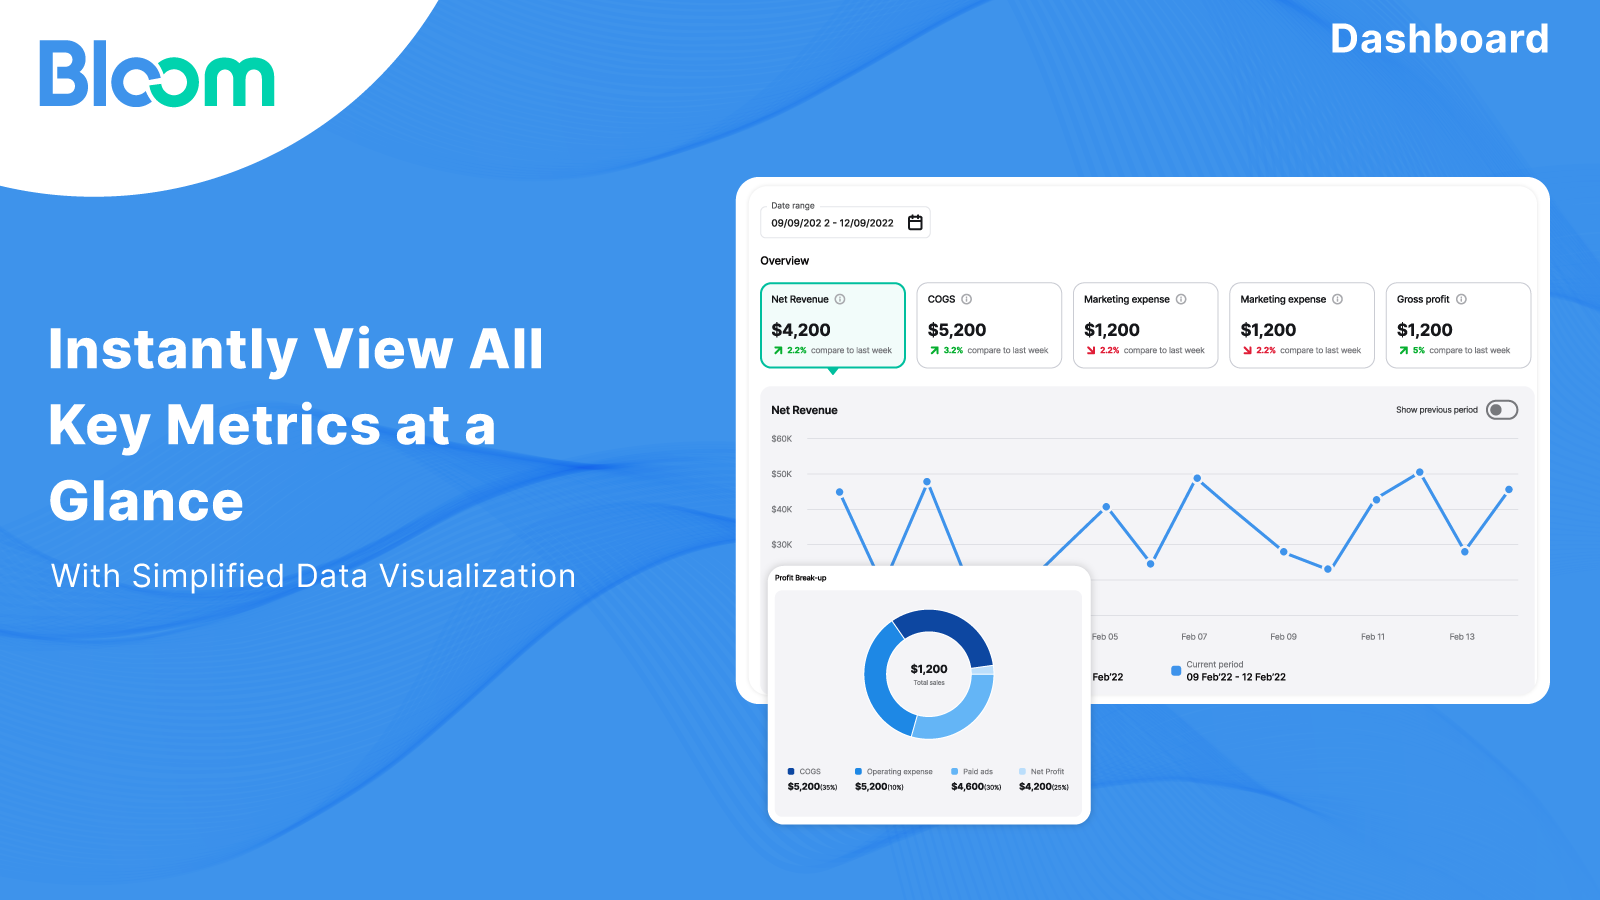 Instantly View All Key Metrics at a Glance